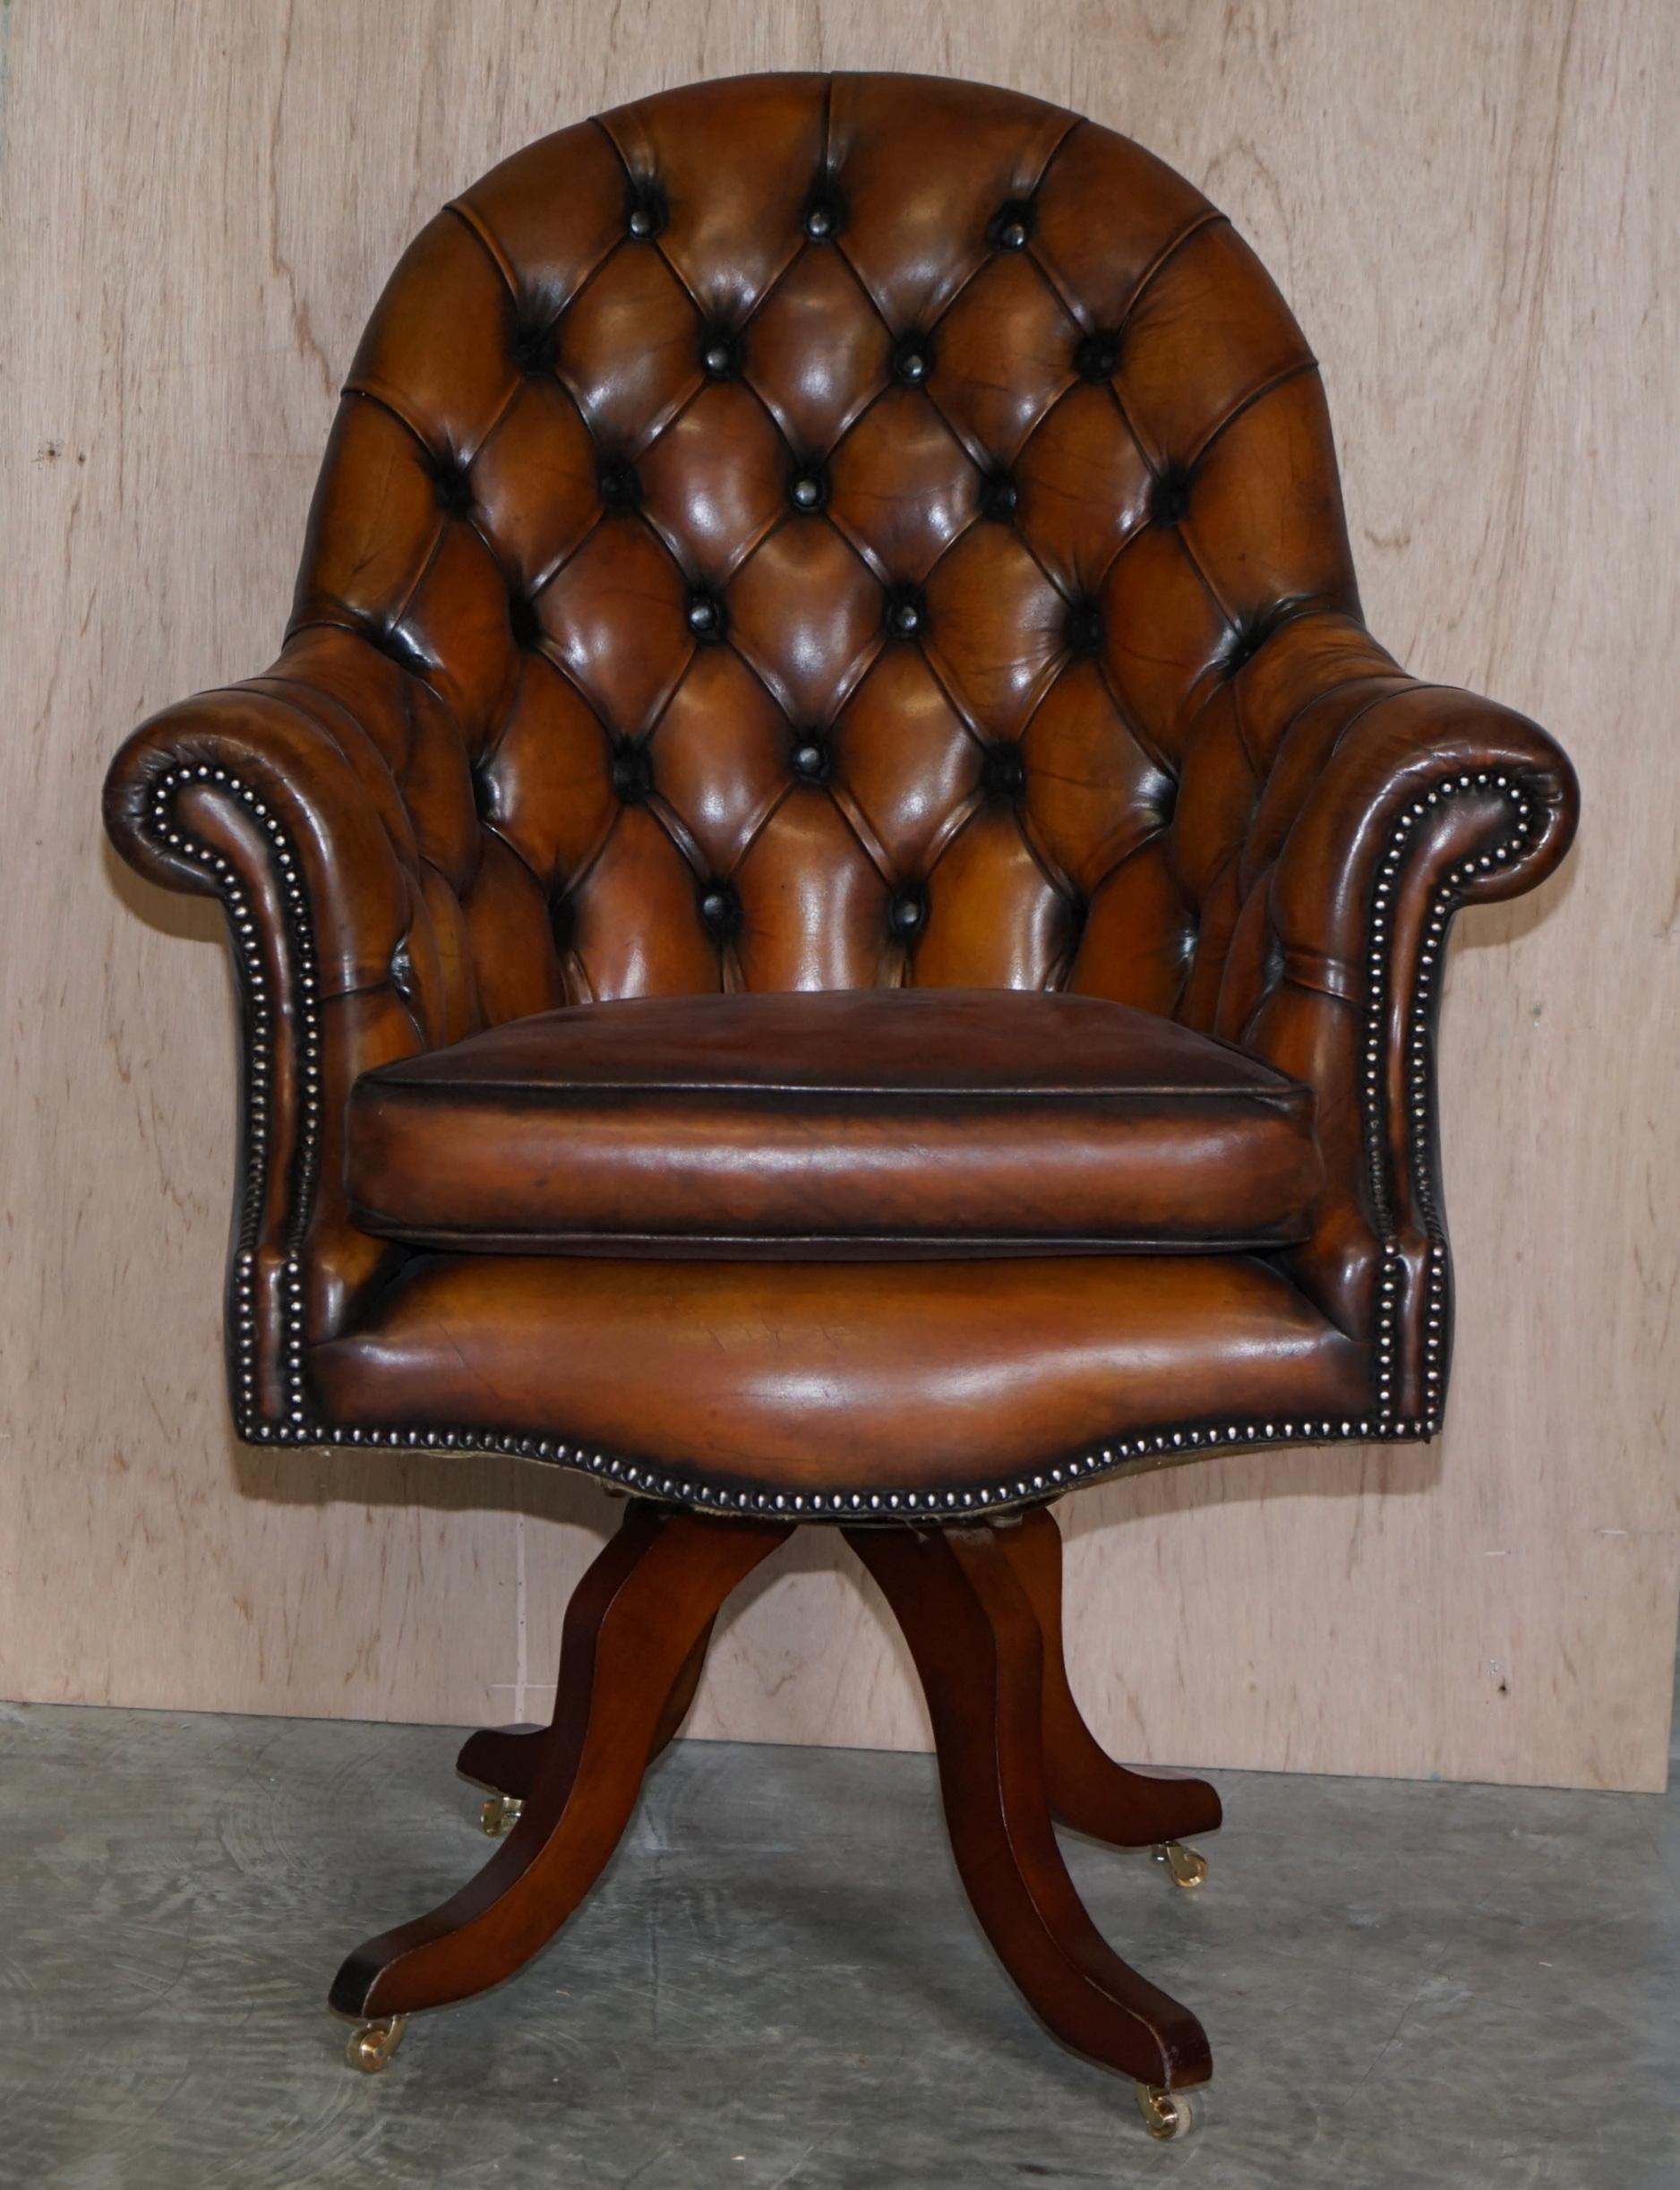 We are delighted to offer for sale this stunning fully restored aged brown leather Godfather Directors armchair with original four leg base, circa 1890’s

This is a very fine and well made English circa 1890’s Directors chair, it has a coil sprung